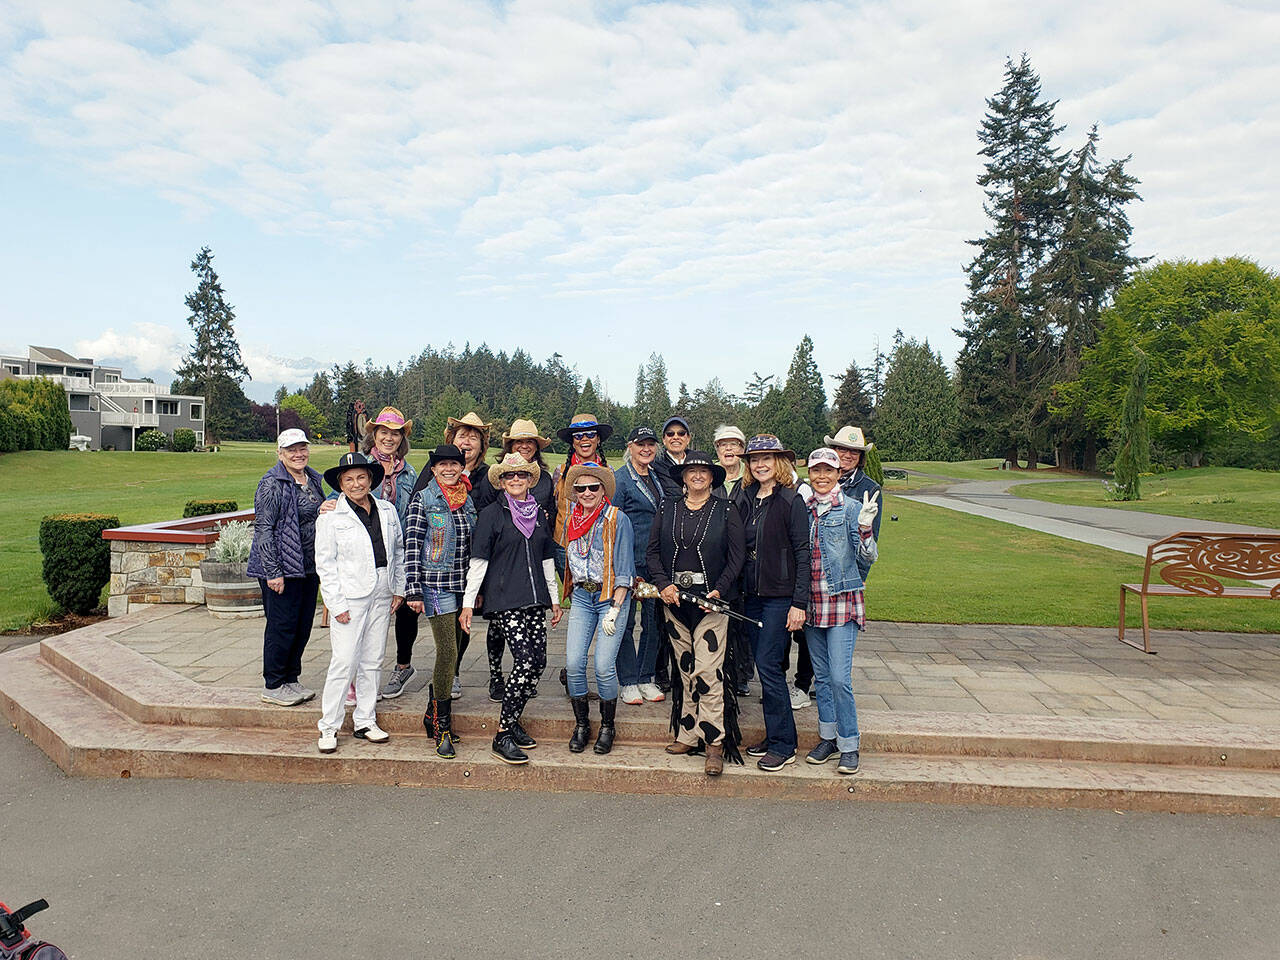 The Cedars at Dungeness Women’s Golf Association recently held its annual Member/Member Golf Tournament with the theme of “Rhinestone Cowgirl.”